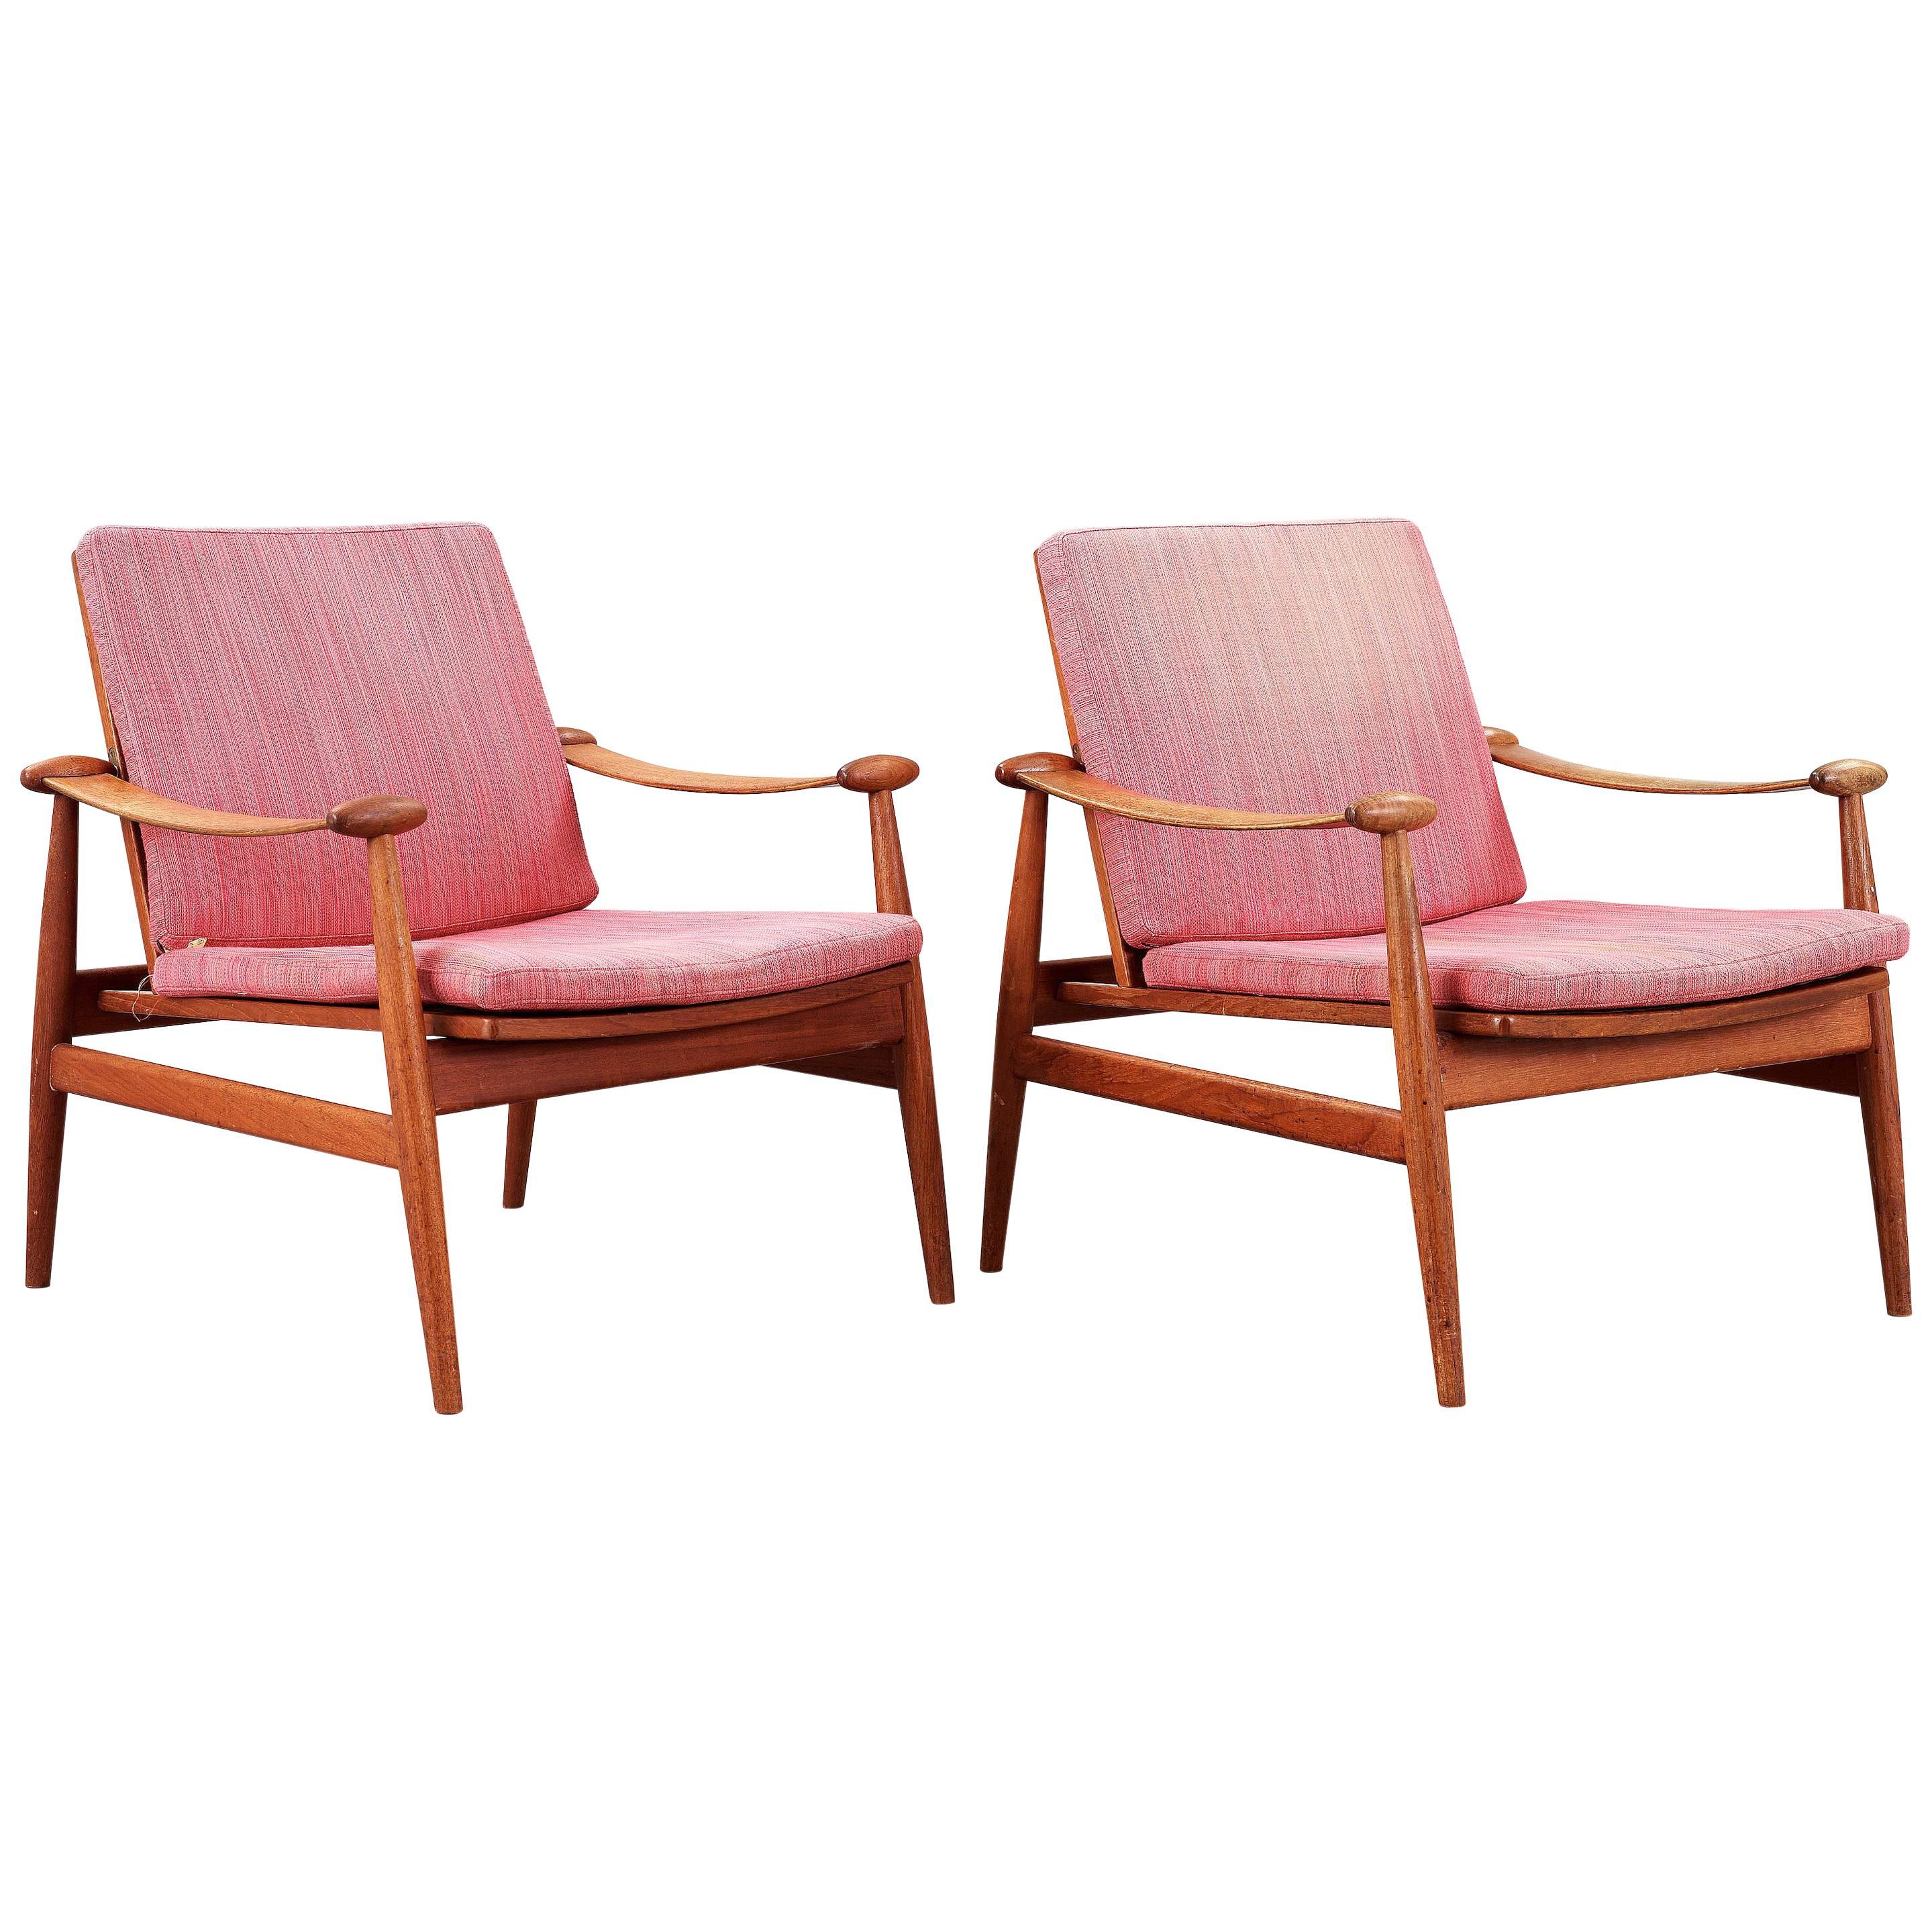 Early Lounge Chairs Designed by Finn Juhl for France & Son